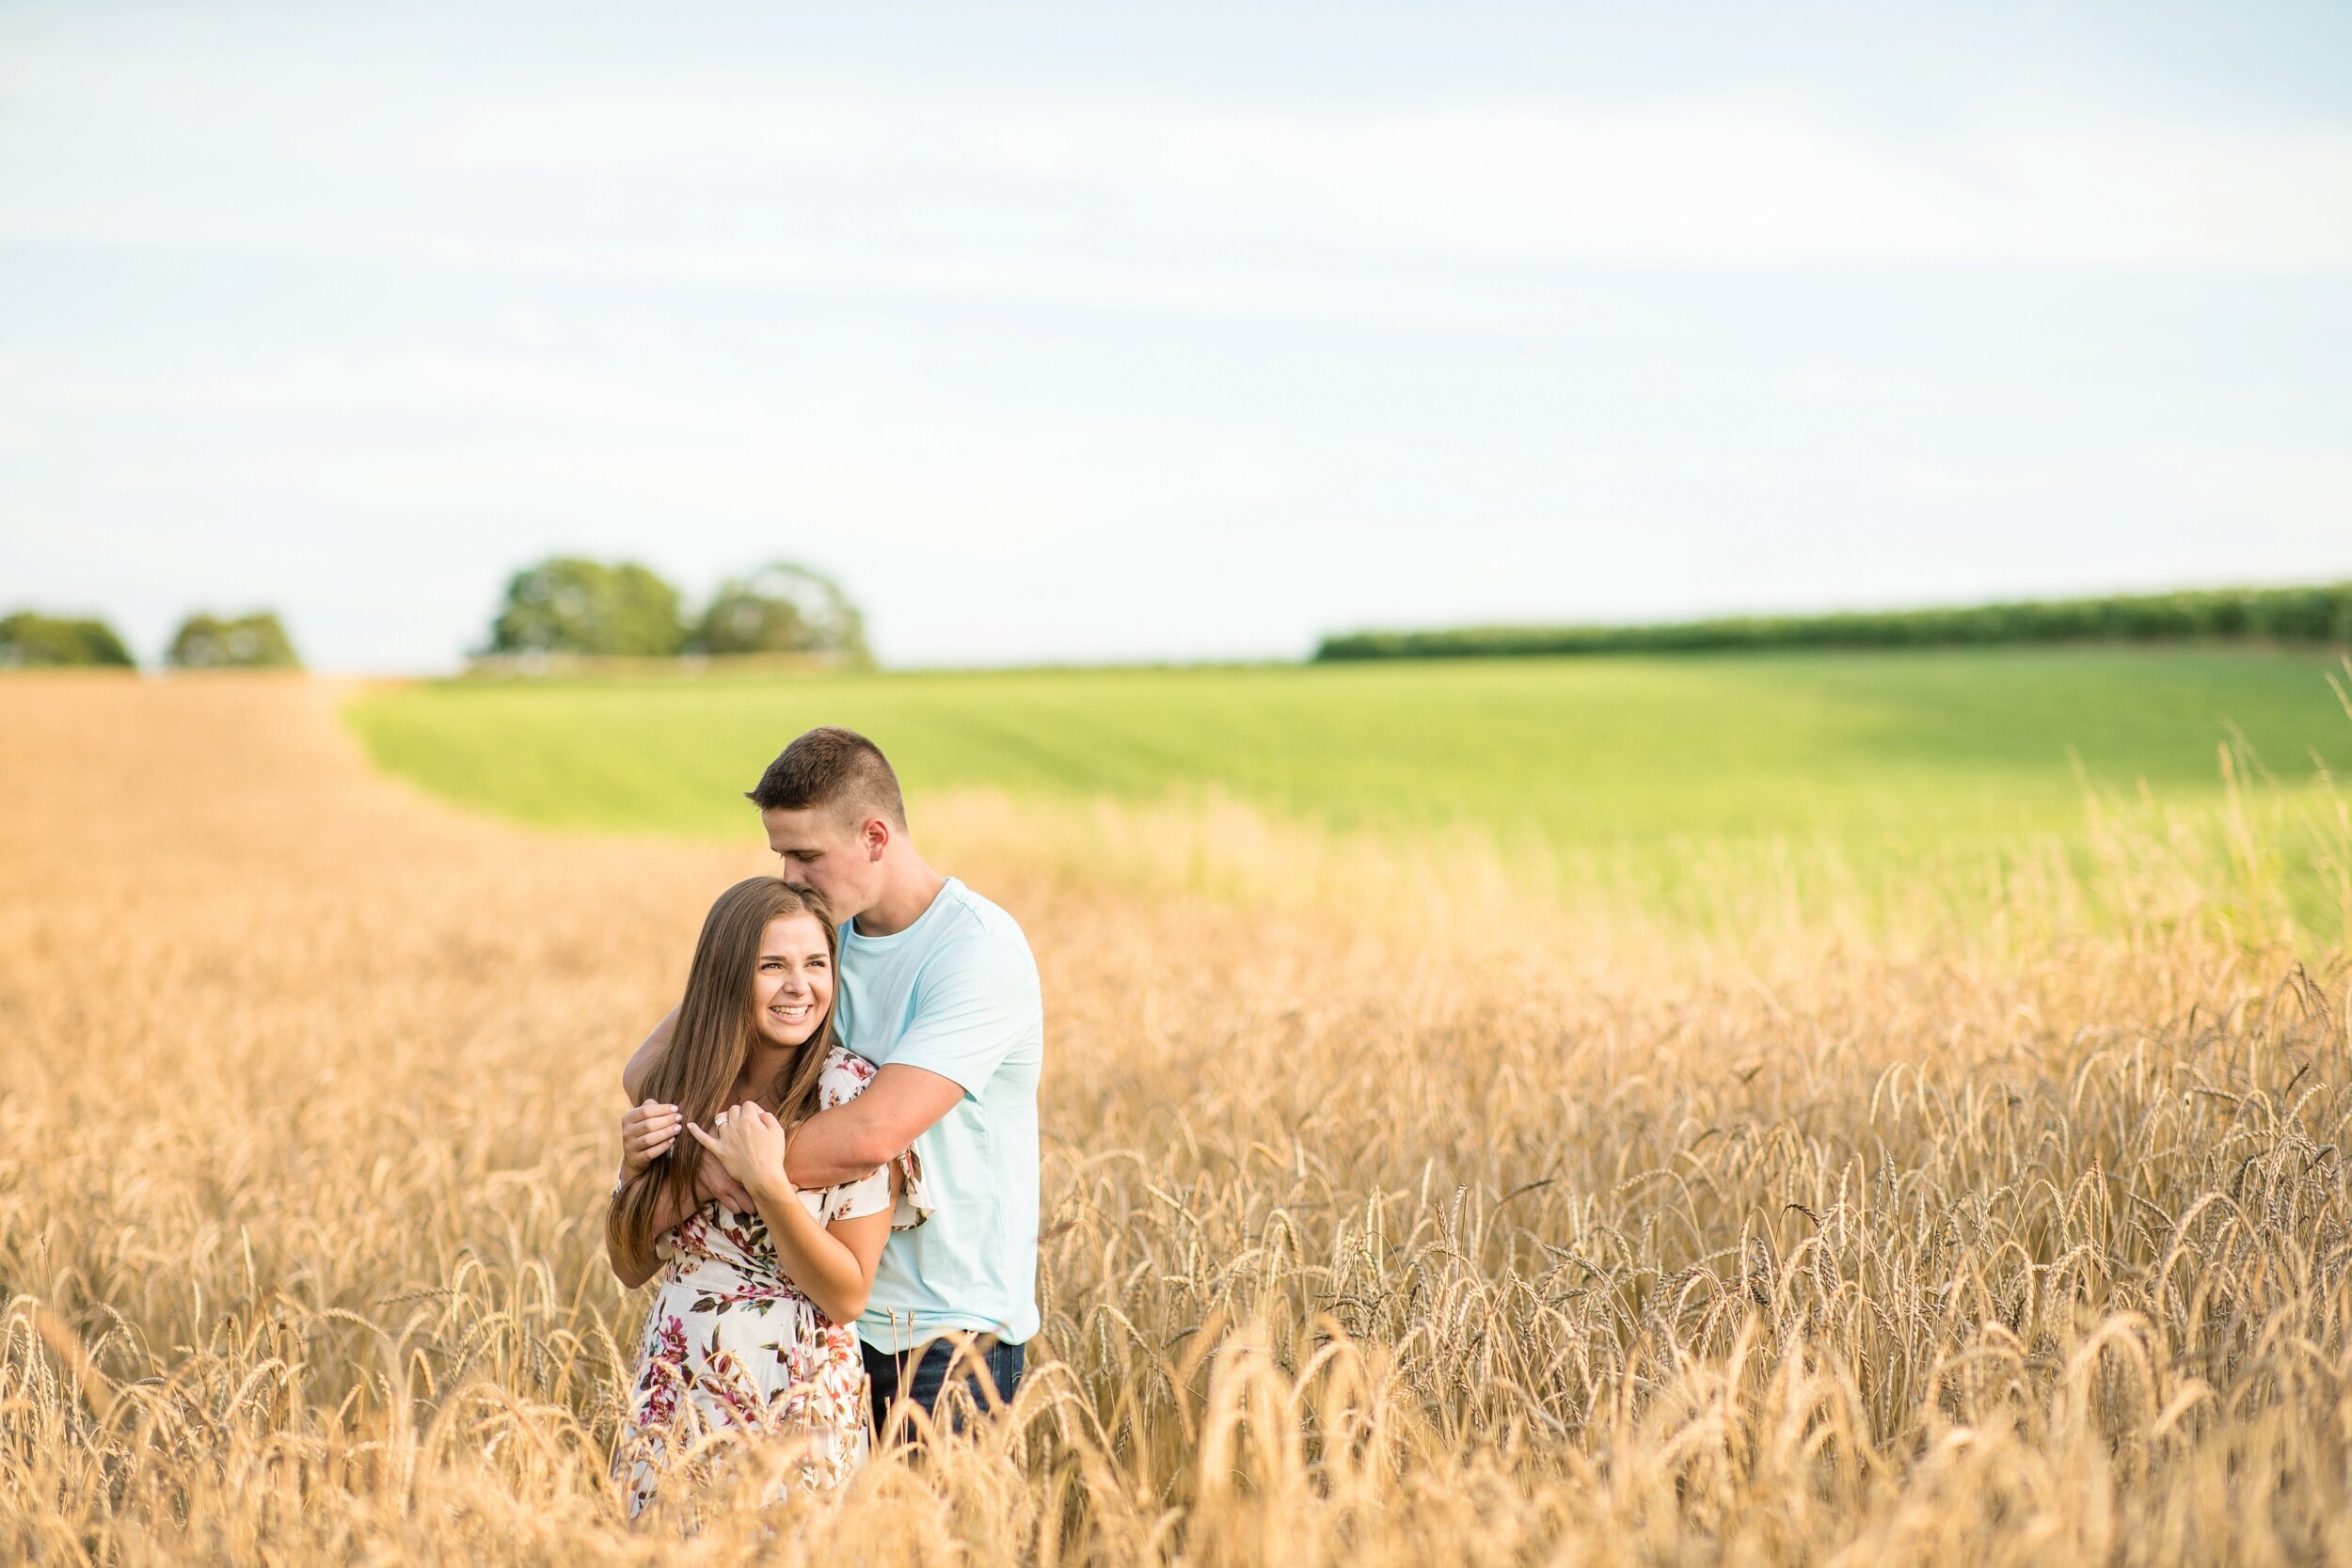 location ideas for photo sessions near cranberry township and zelienople, cranberry township photographer, zelienople photographer, north pittsburgh photographer, mcconnells mill photos